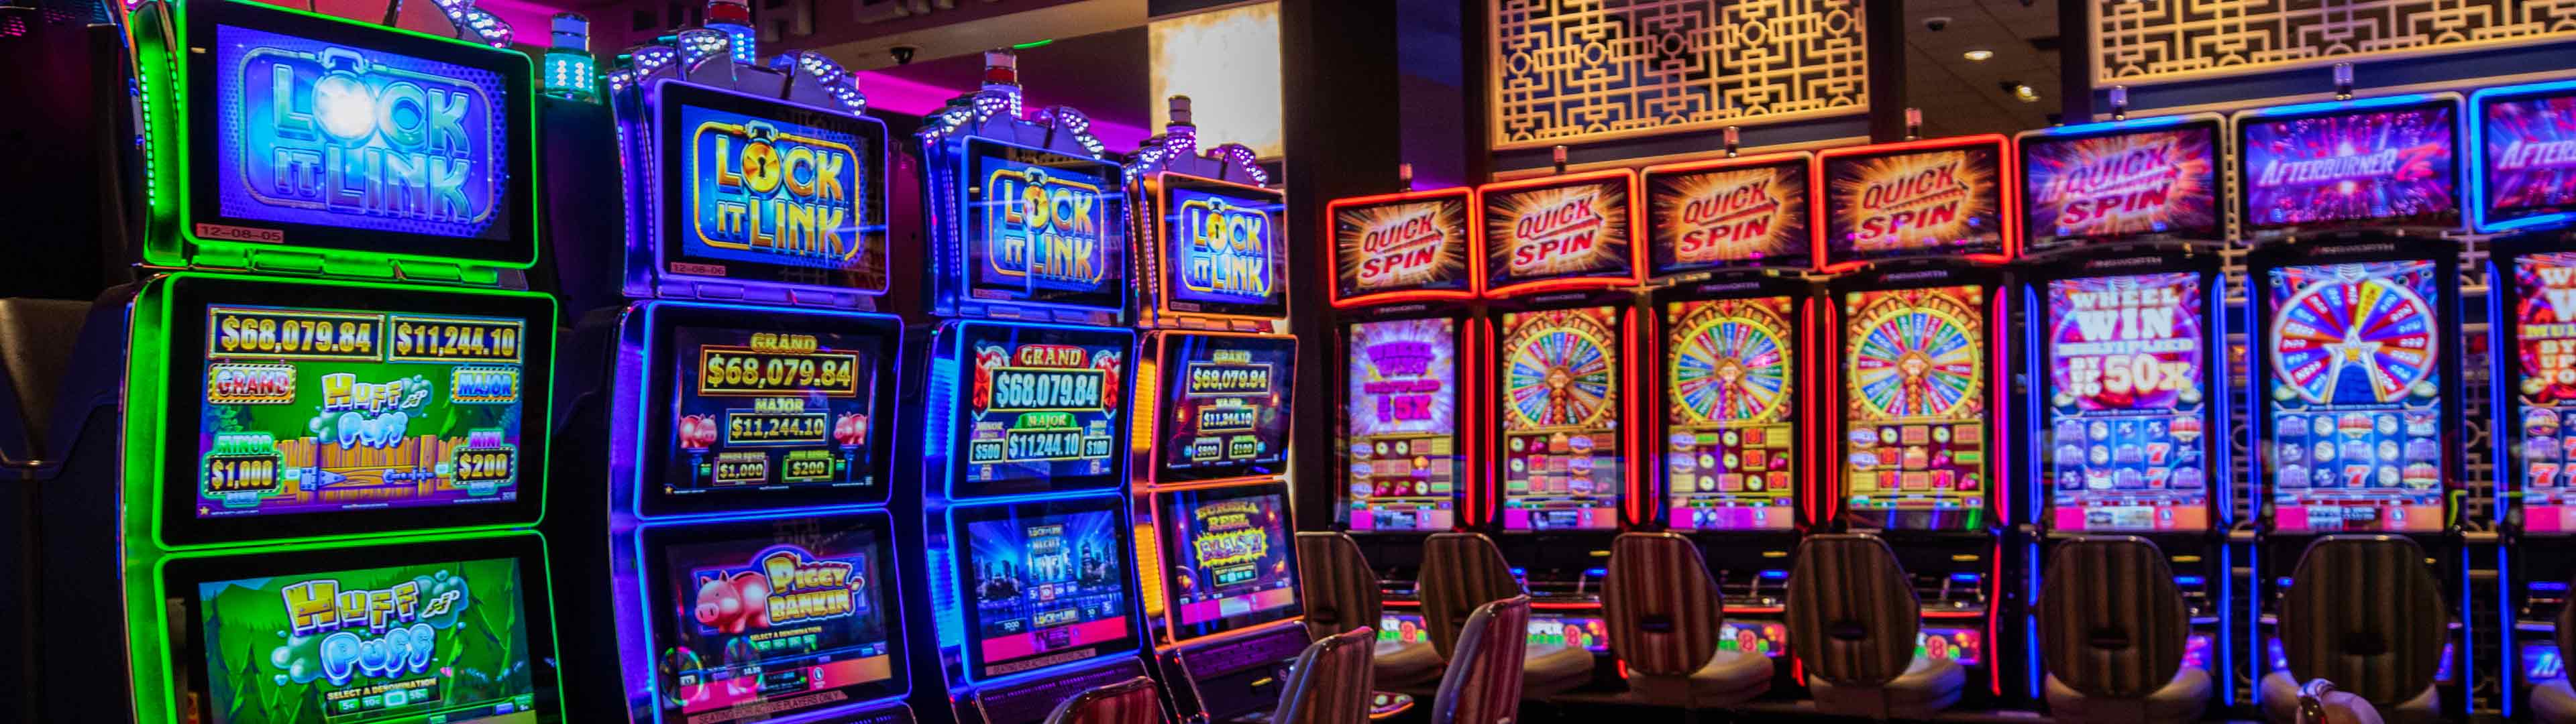 Your Guide To The Best Casino Offers And Promotions